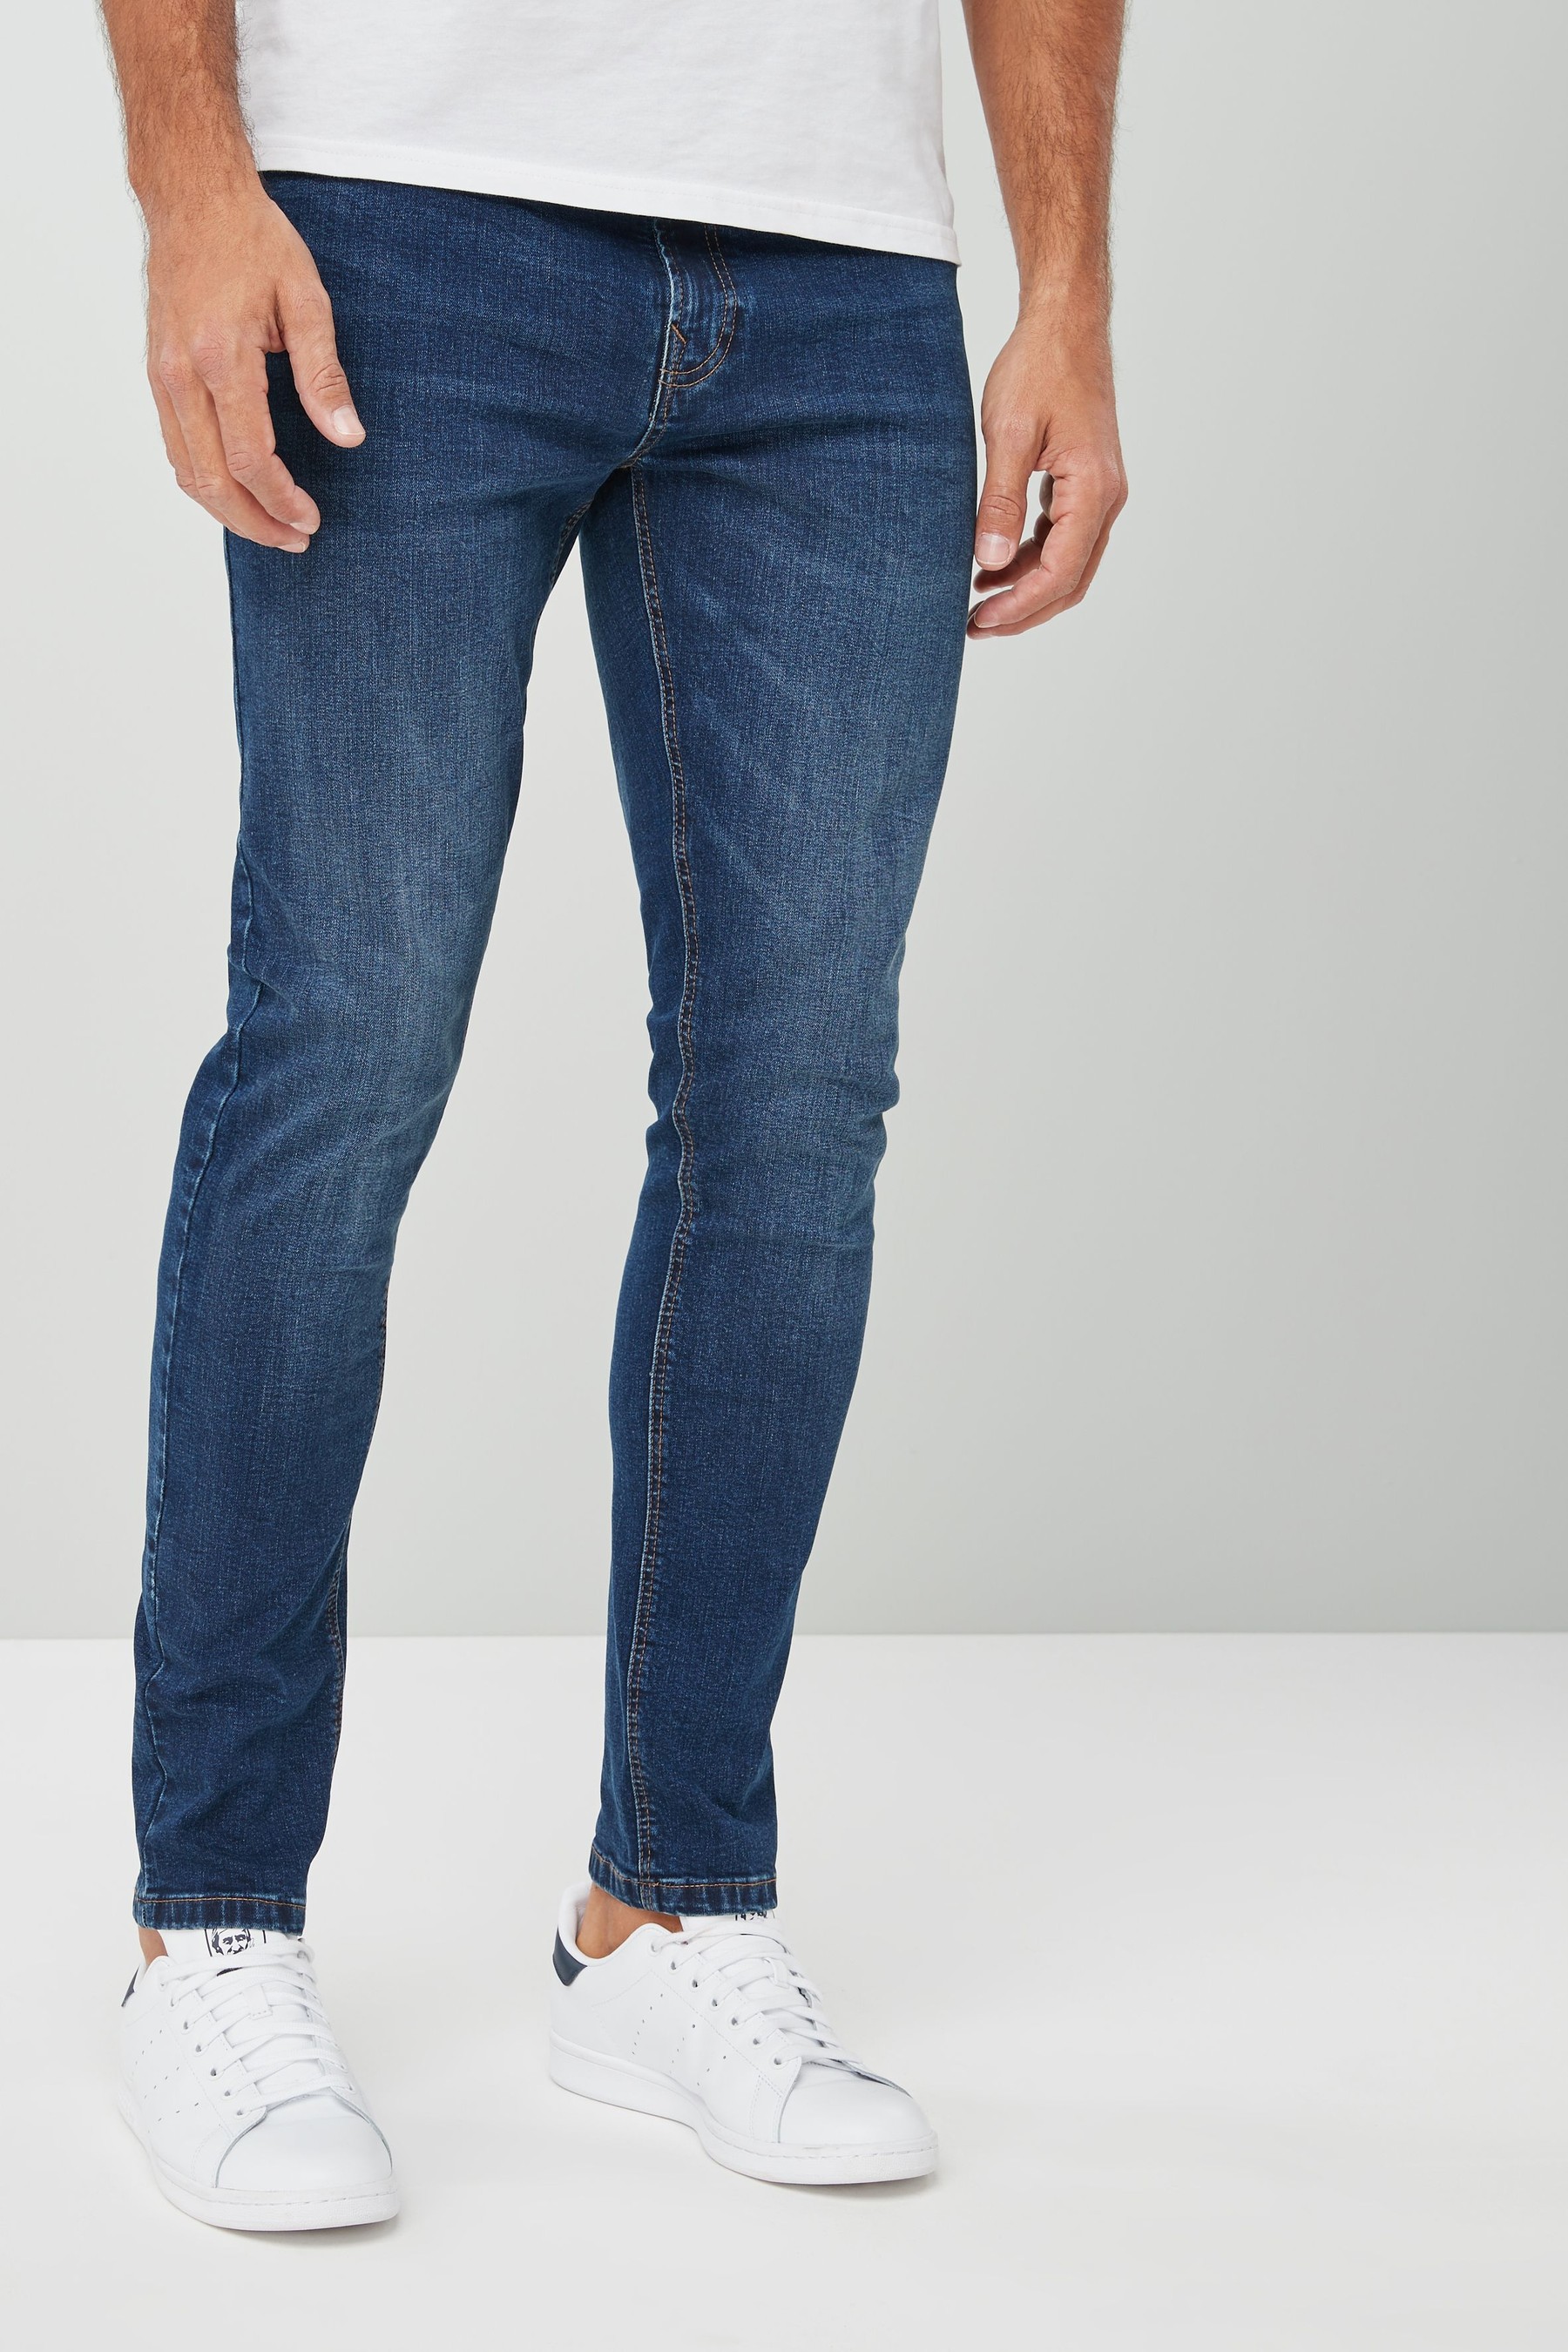 A74285s Skinny Fit